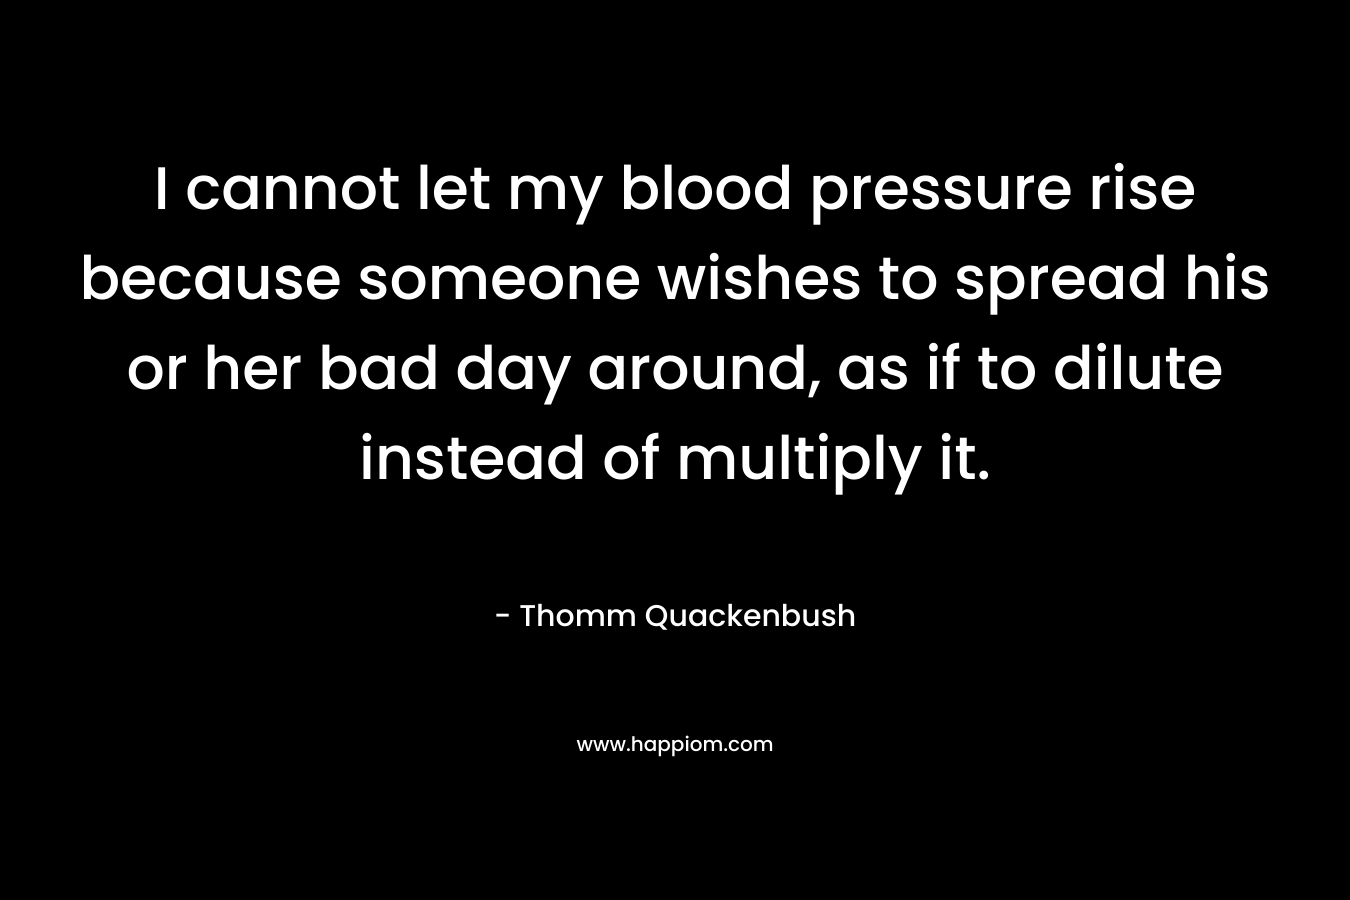 I cannot let my blood pressure rise because someone wishes to spread his or her bad day around, as if to dilute instead of multiply it. – Thomm Quackenbush